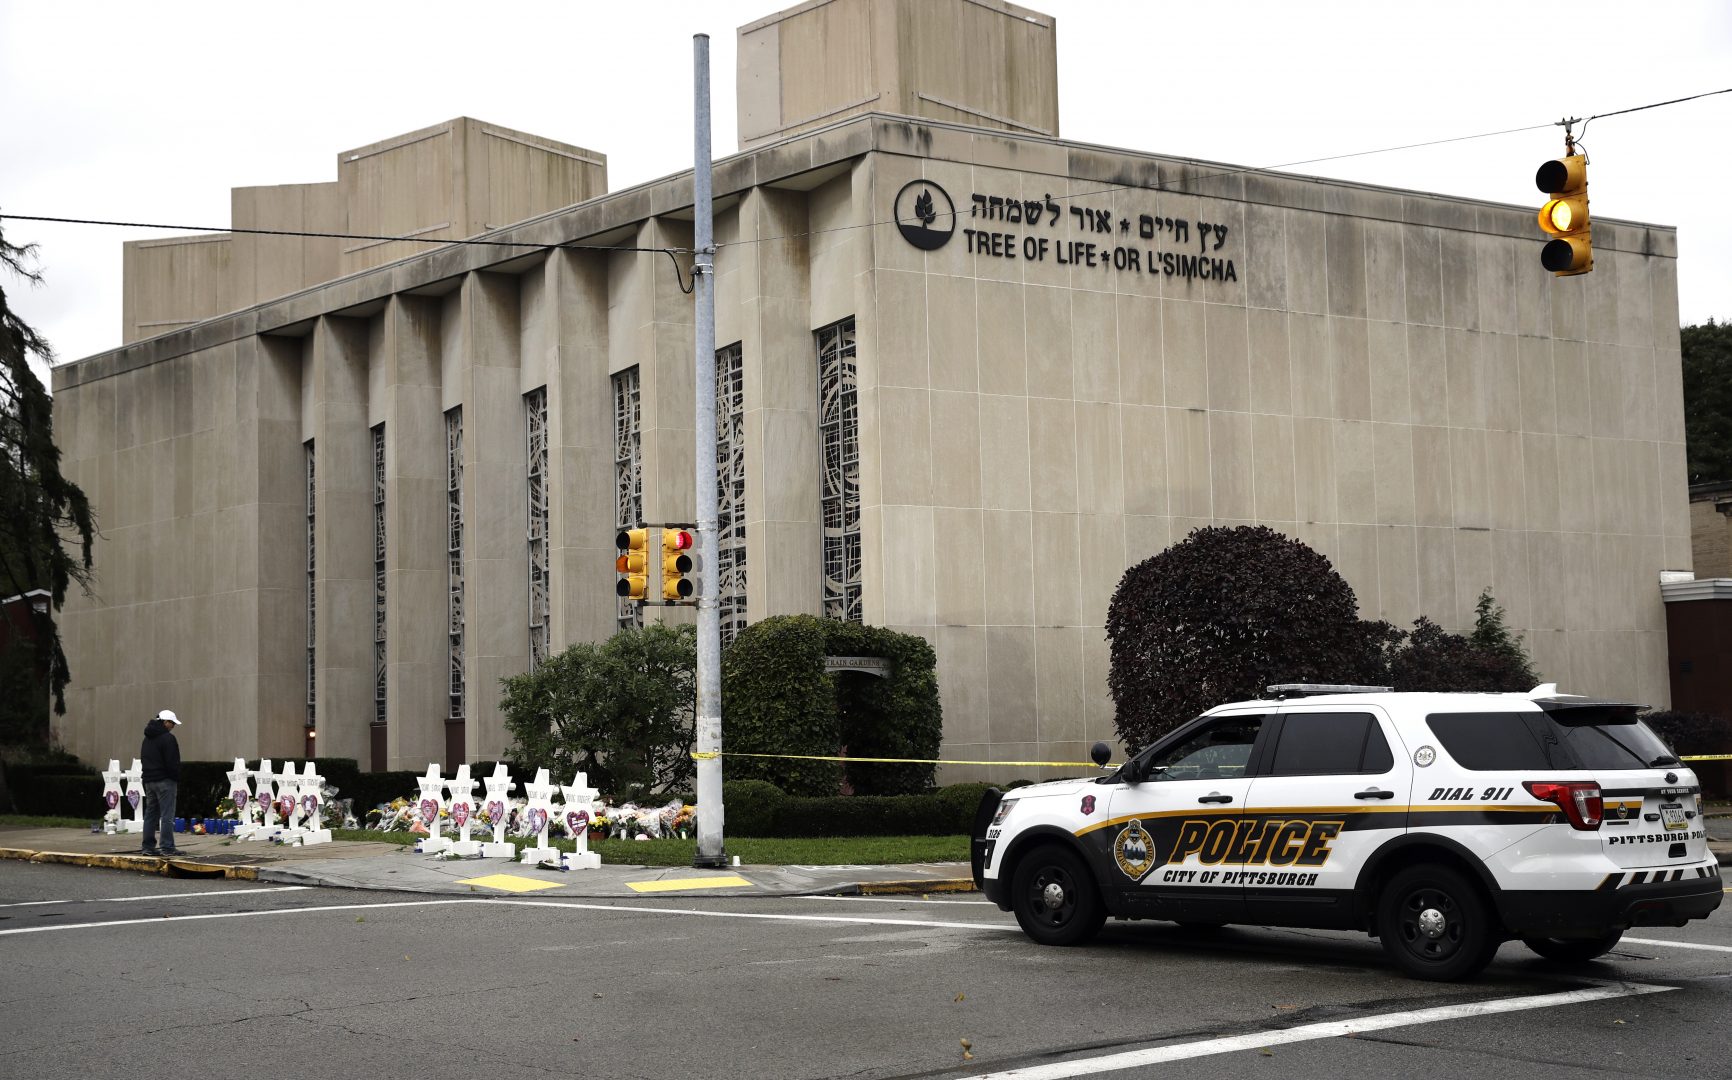 FILE PHOTO: A police vehicle is posted near the Tree of Life/Or L'Simcha Synagogue in Pittsburgh, Monday, Oct. 29, 2018. The U.S. attorney's office in Pittsburgh filed a notice of intent Monday to seek the death penalty against Robert Bowers in the October 2018 attack.